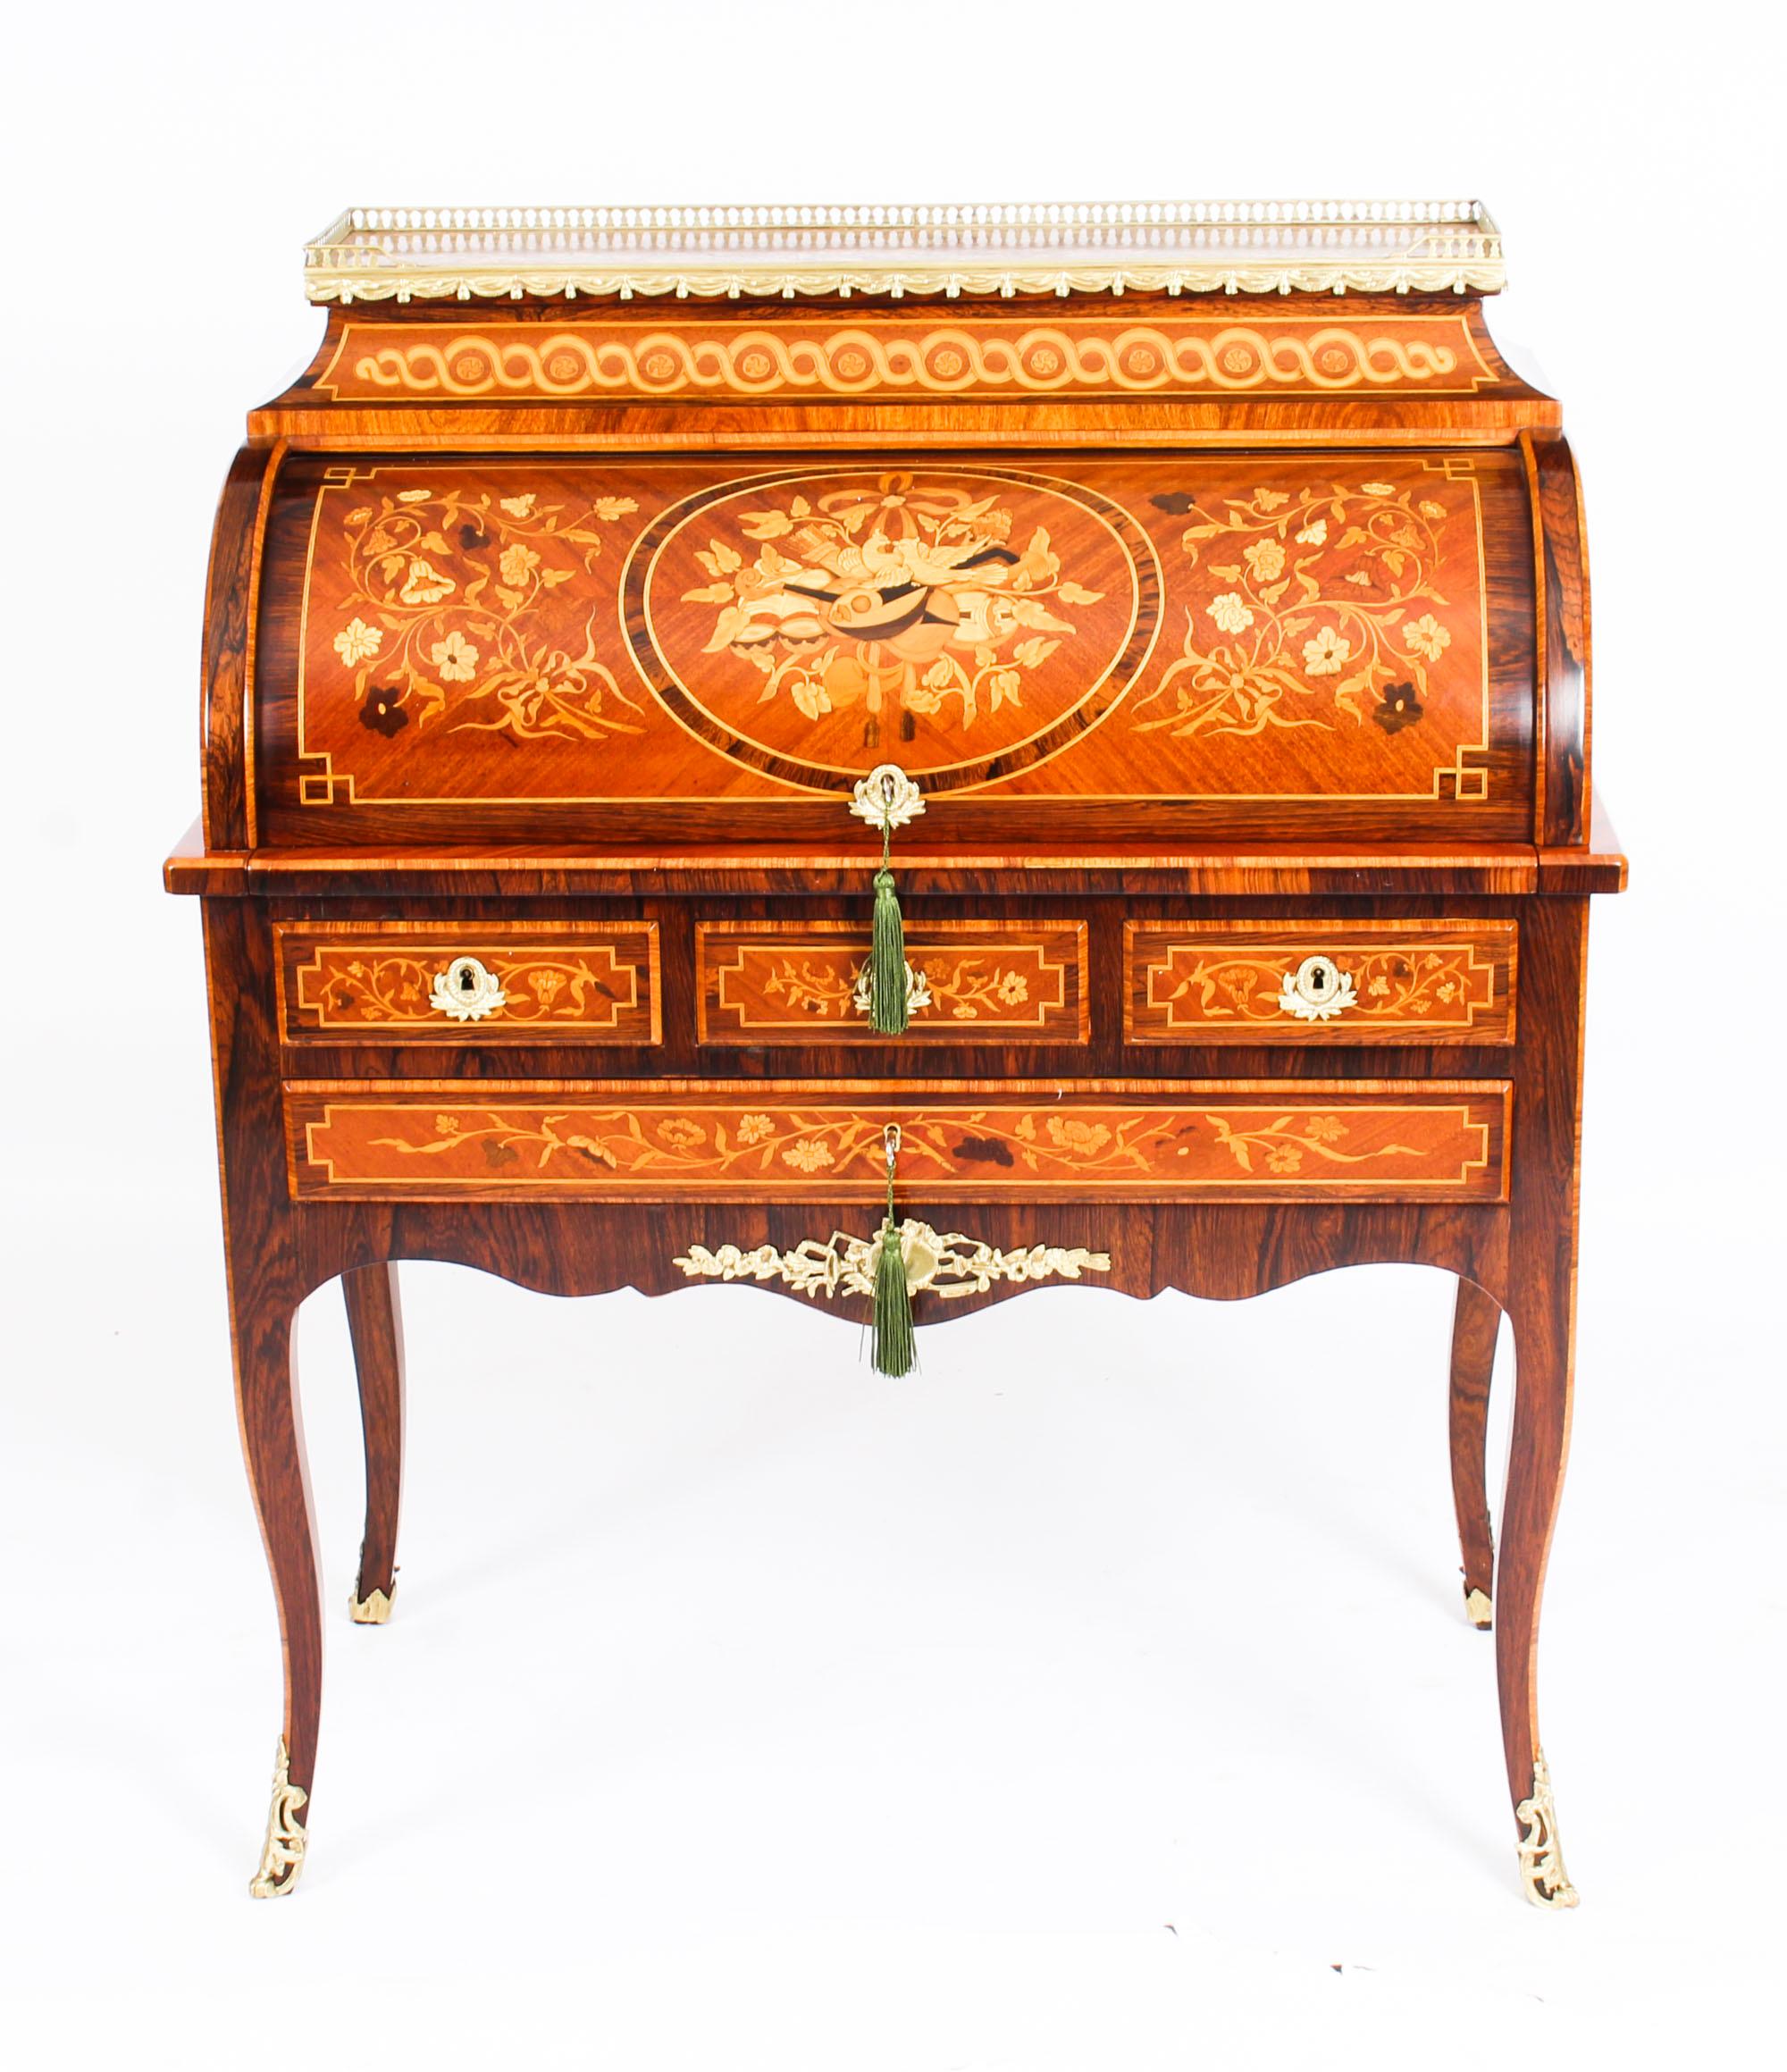 This is a magnificent antique French kingwood and walnut marquetry Louis Revival secretaire a cylindre, circa 1870 in date.

It is decorated throughout with beautiful floral marquetry with trophies, lovebirds and flowering stems, the centre of the